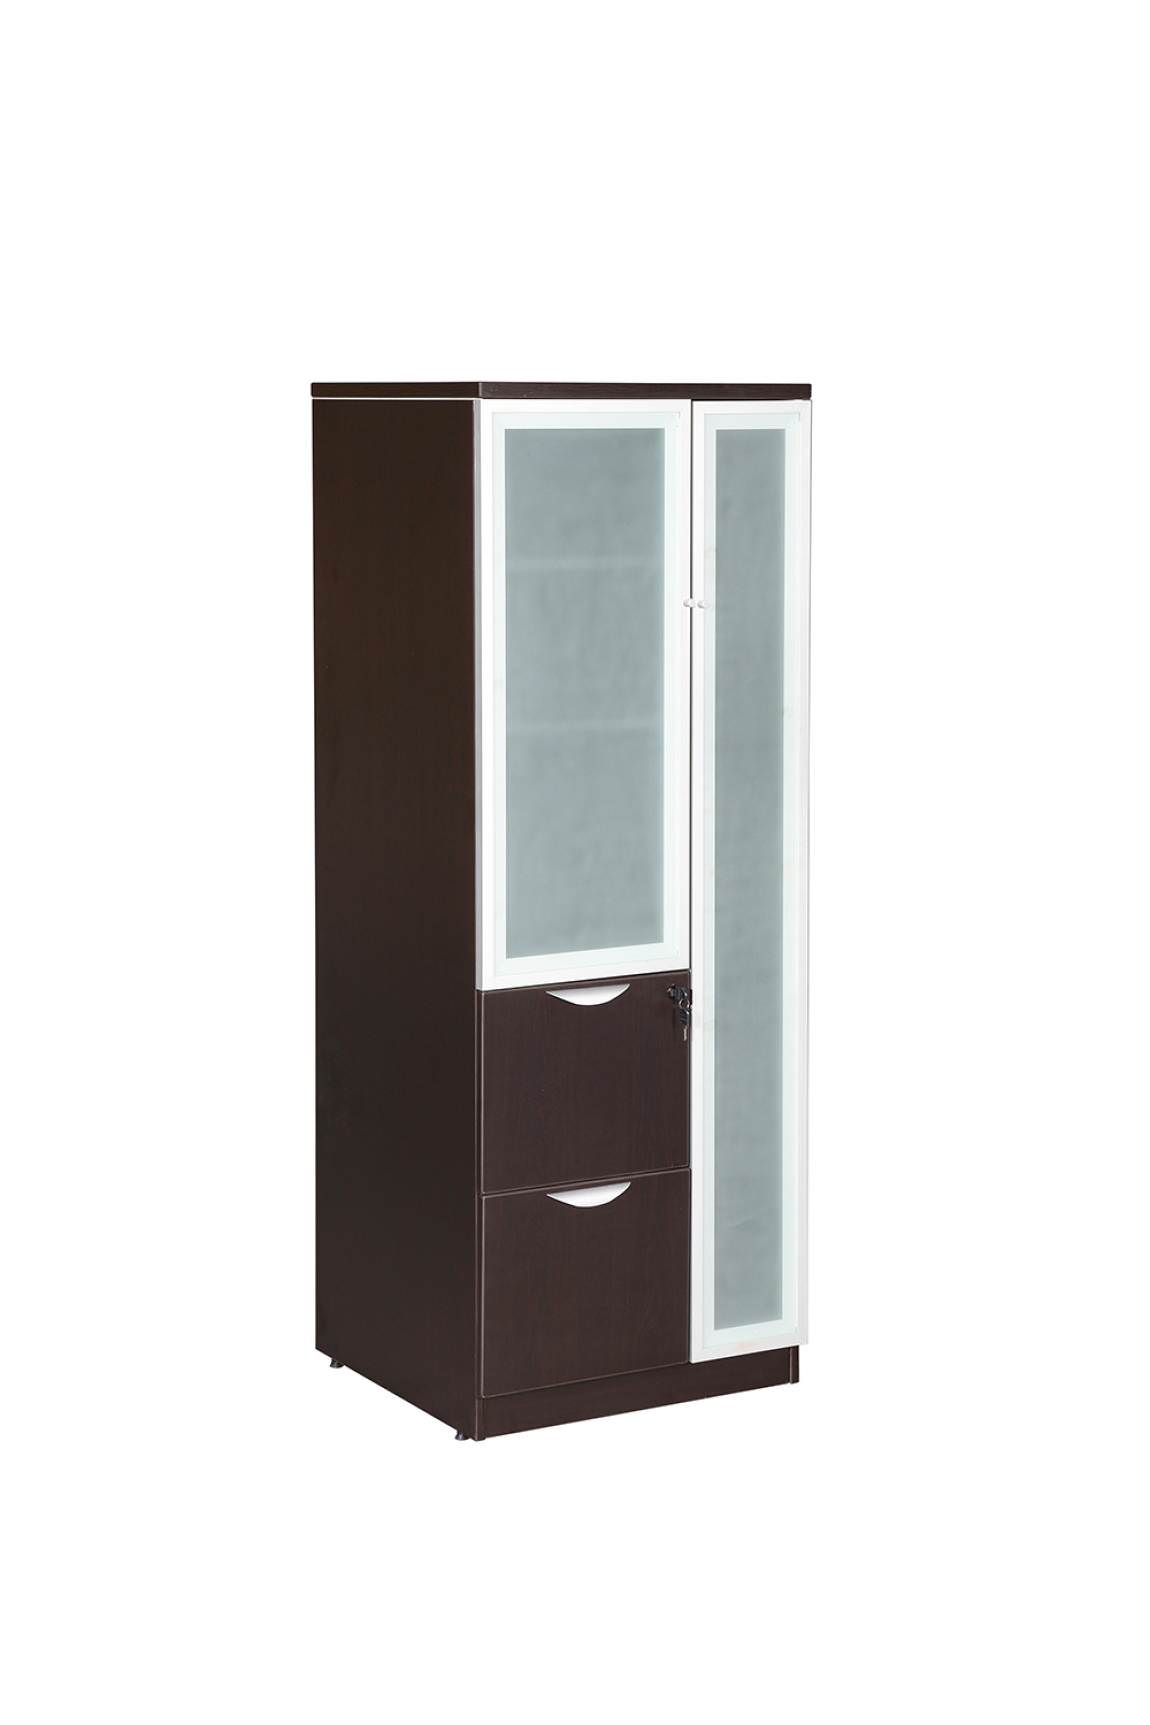 Personal Storage Cabinet Glass Doors, Storage Cabinets With Lockable Doors